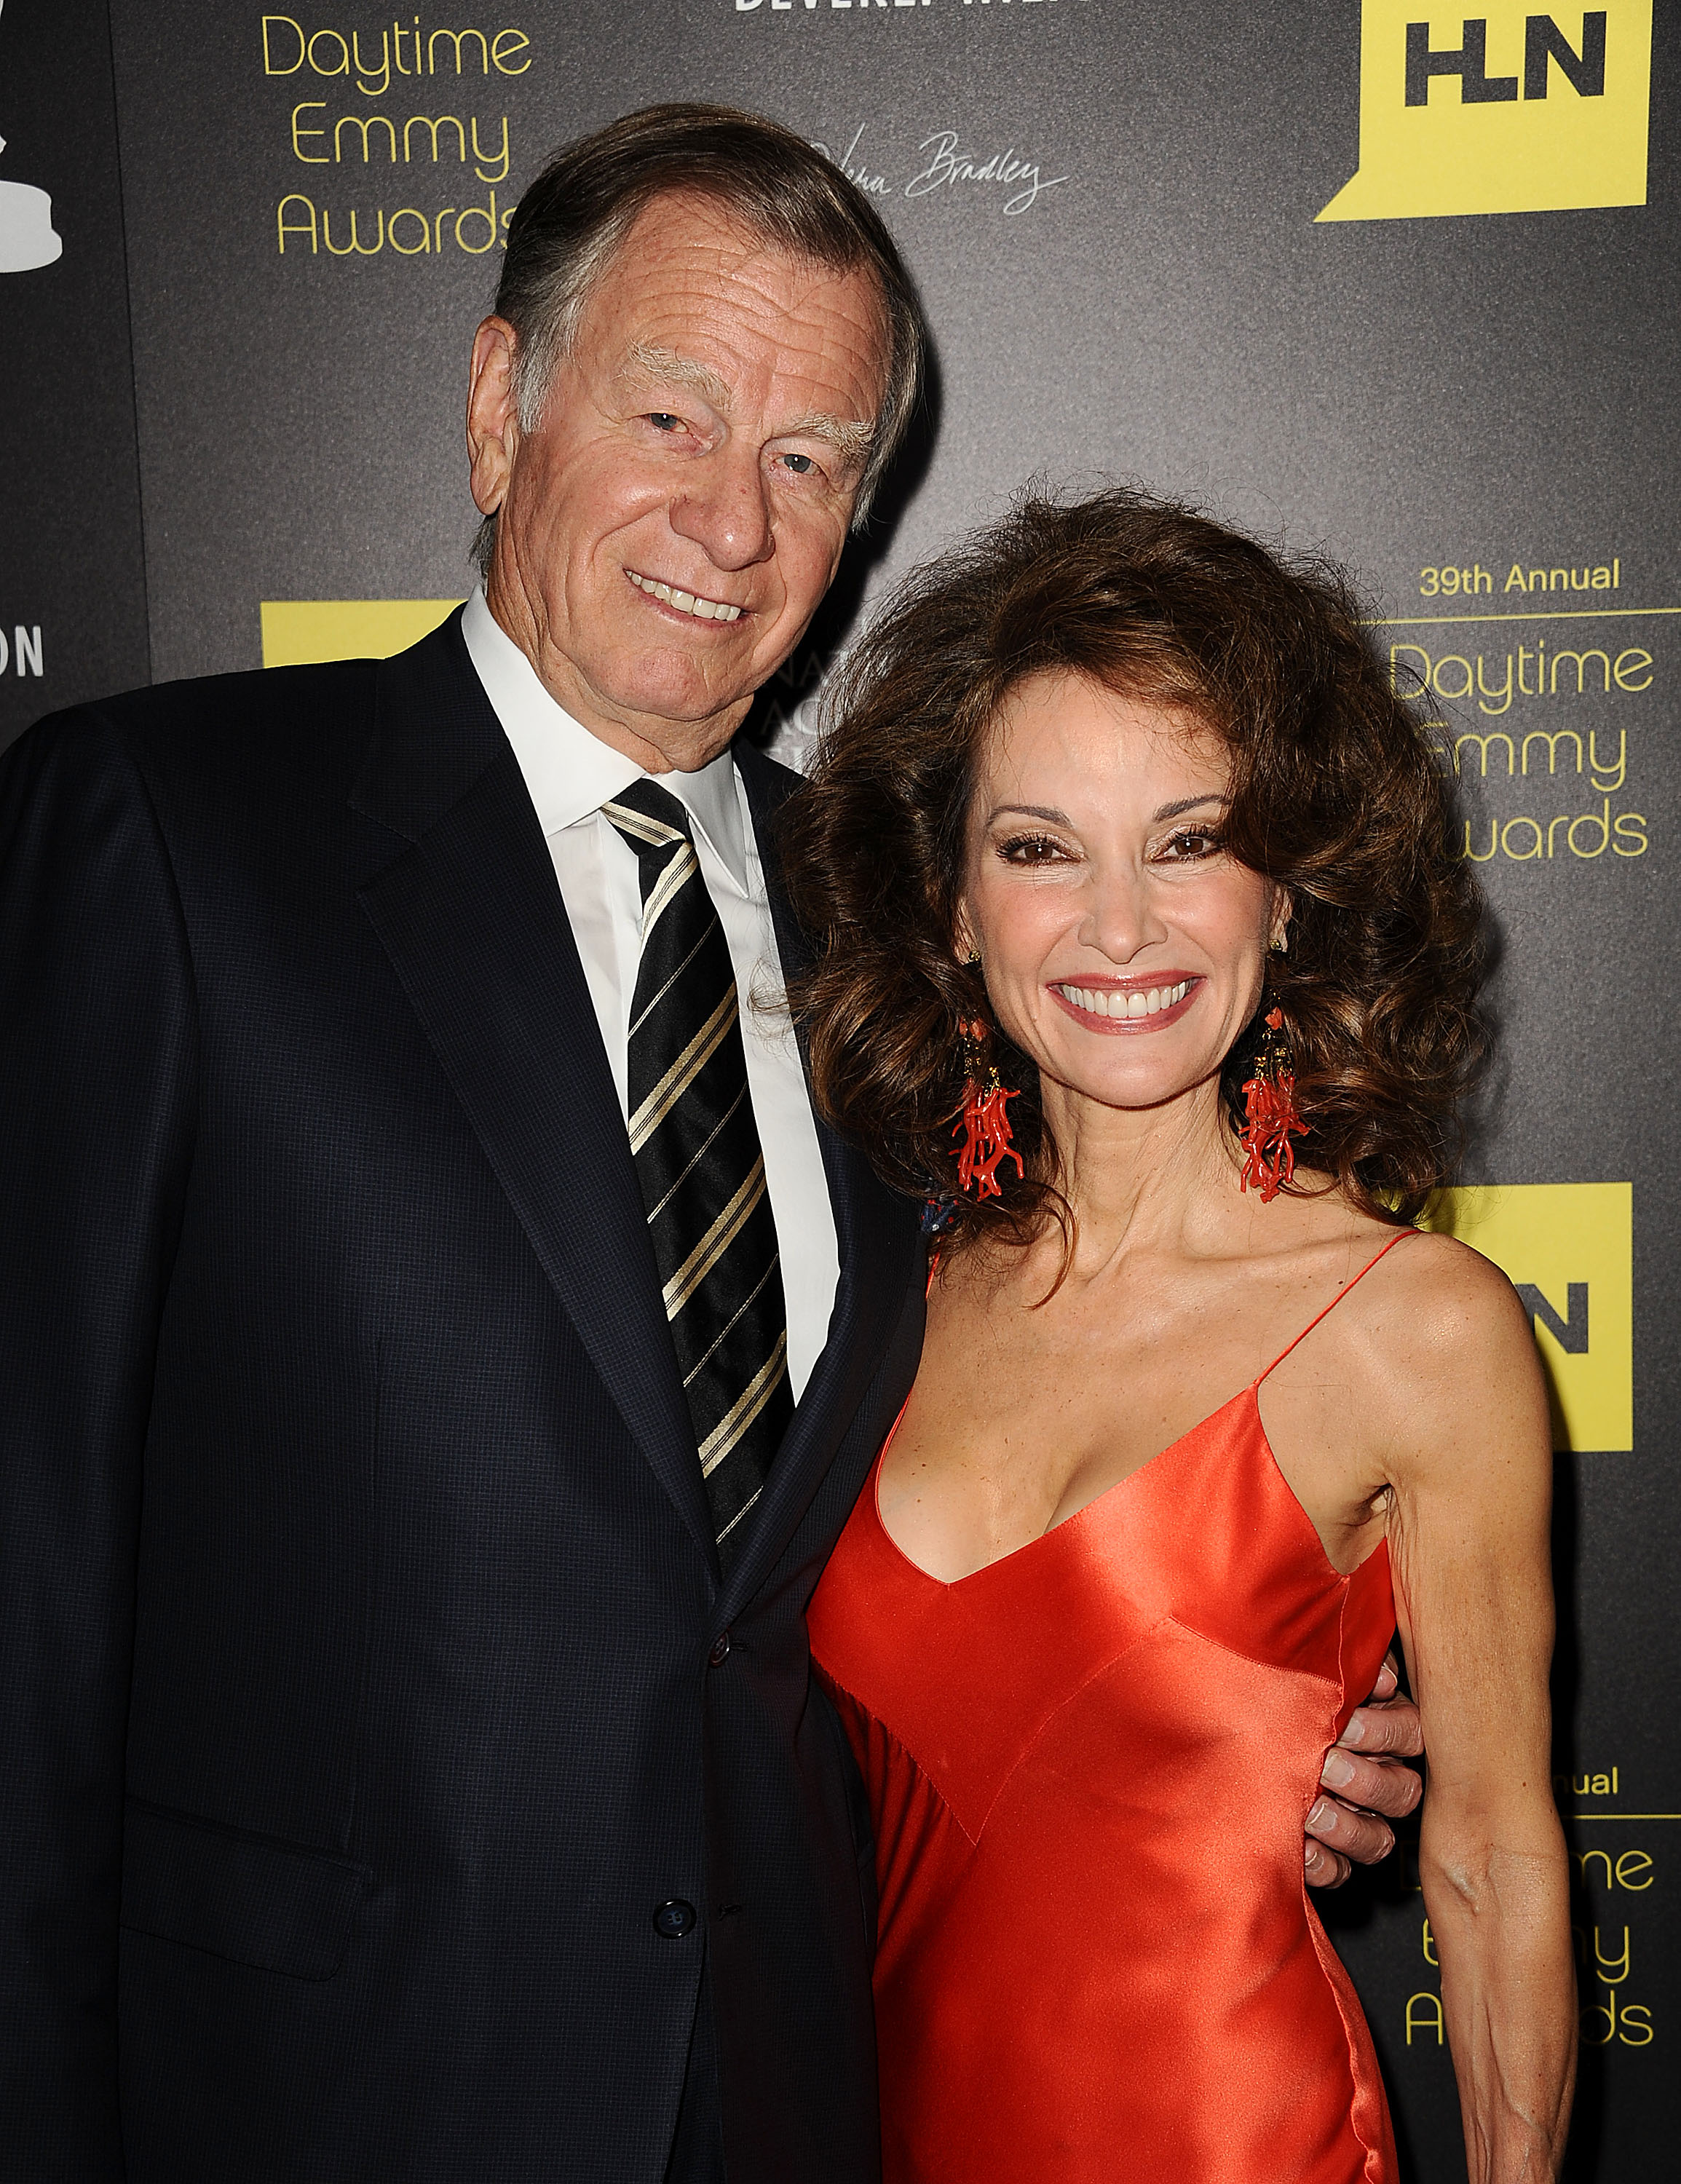 Actress Susan Lucci and husband Helmut Huber at The Beverly Hilton Hotel on June 23, 2012 in Beverly Hills, California. | Source: Getty Images